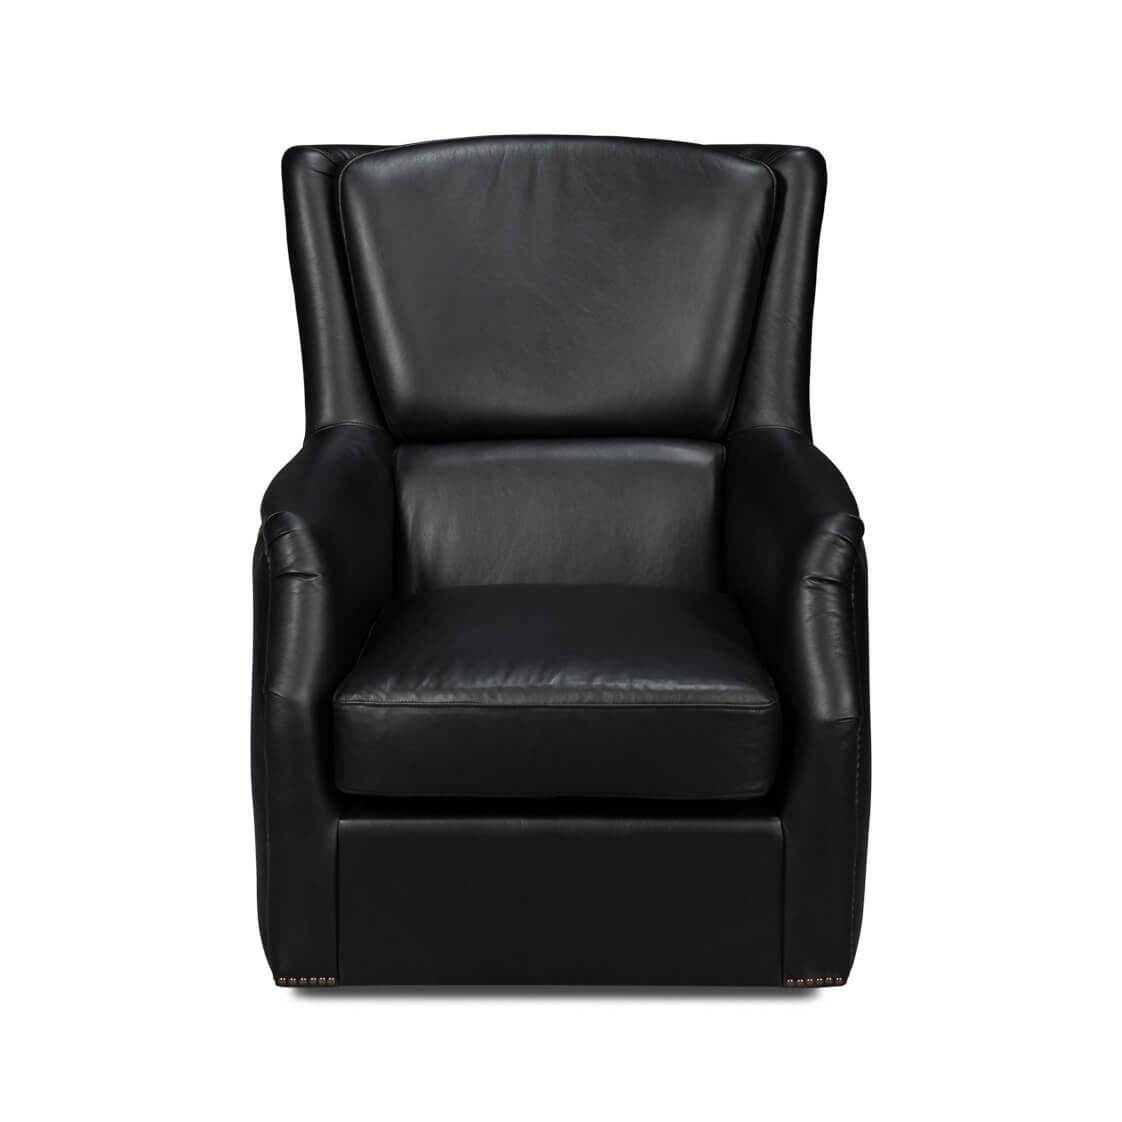 
This classic chair is upholstered in our classic Onyx Black leather and crafted with pure Aniline top-grade leather.

Dimensions: 31